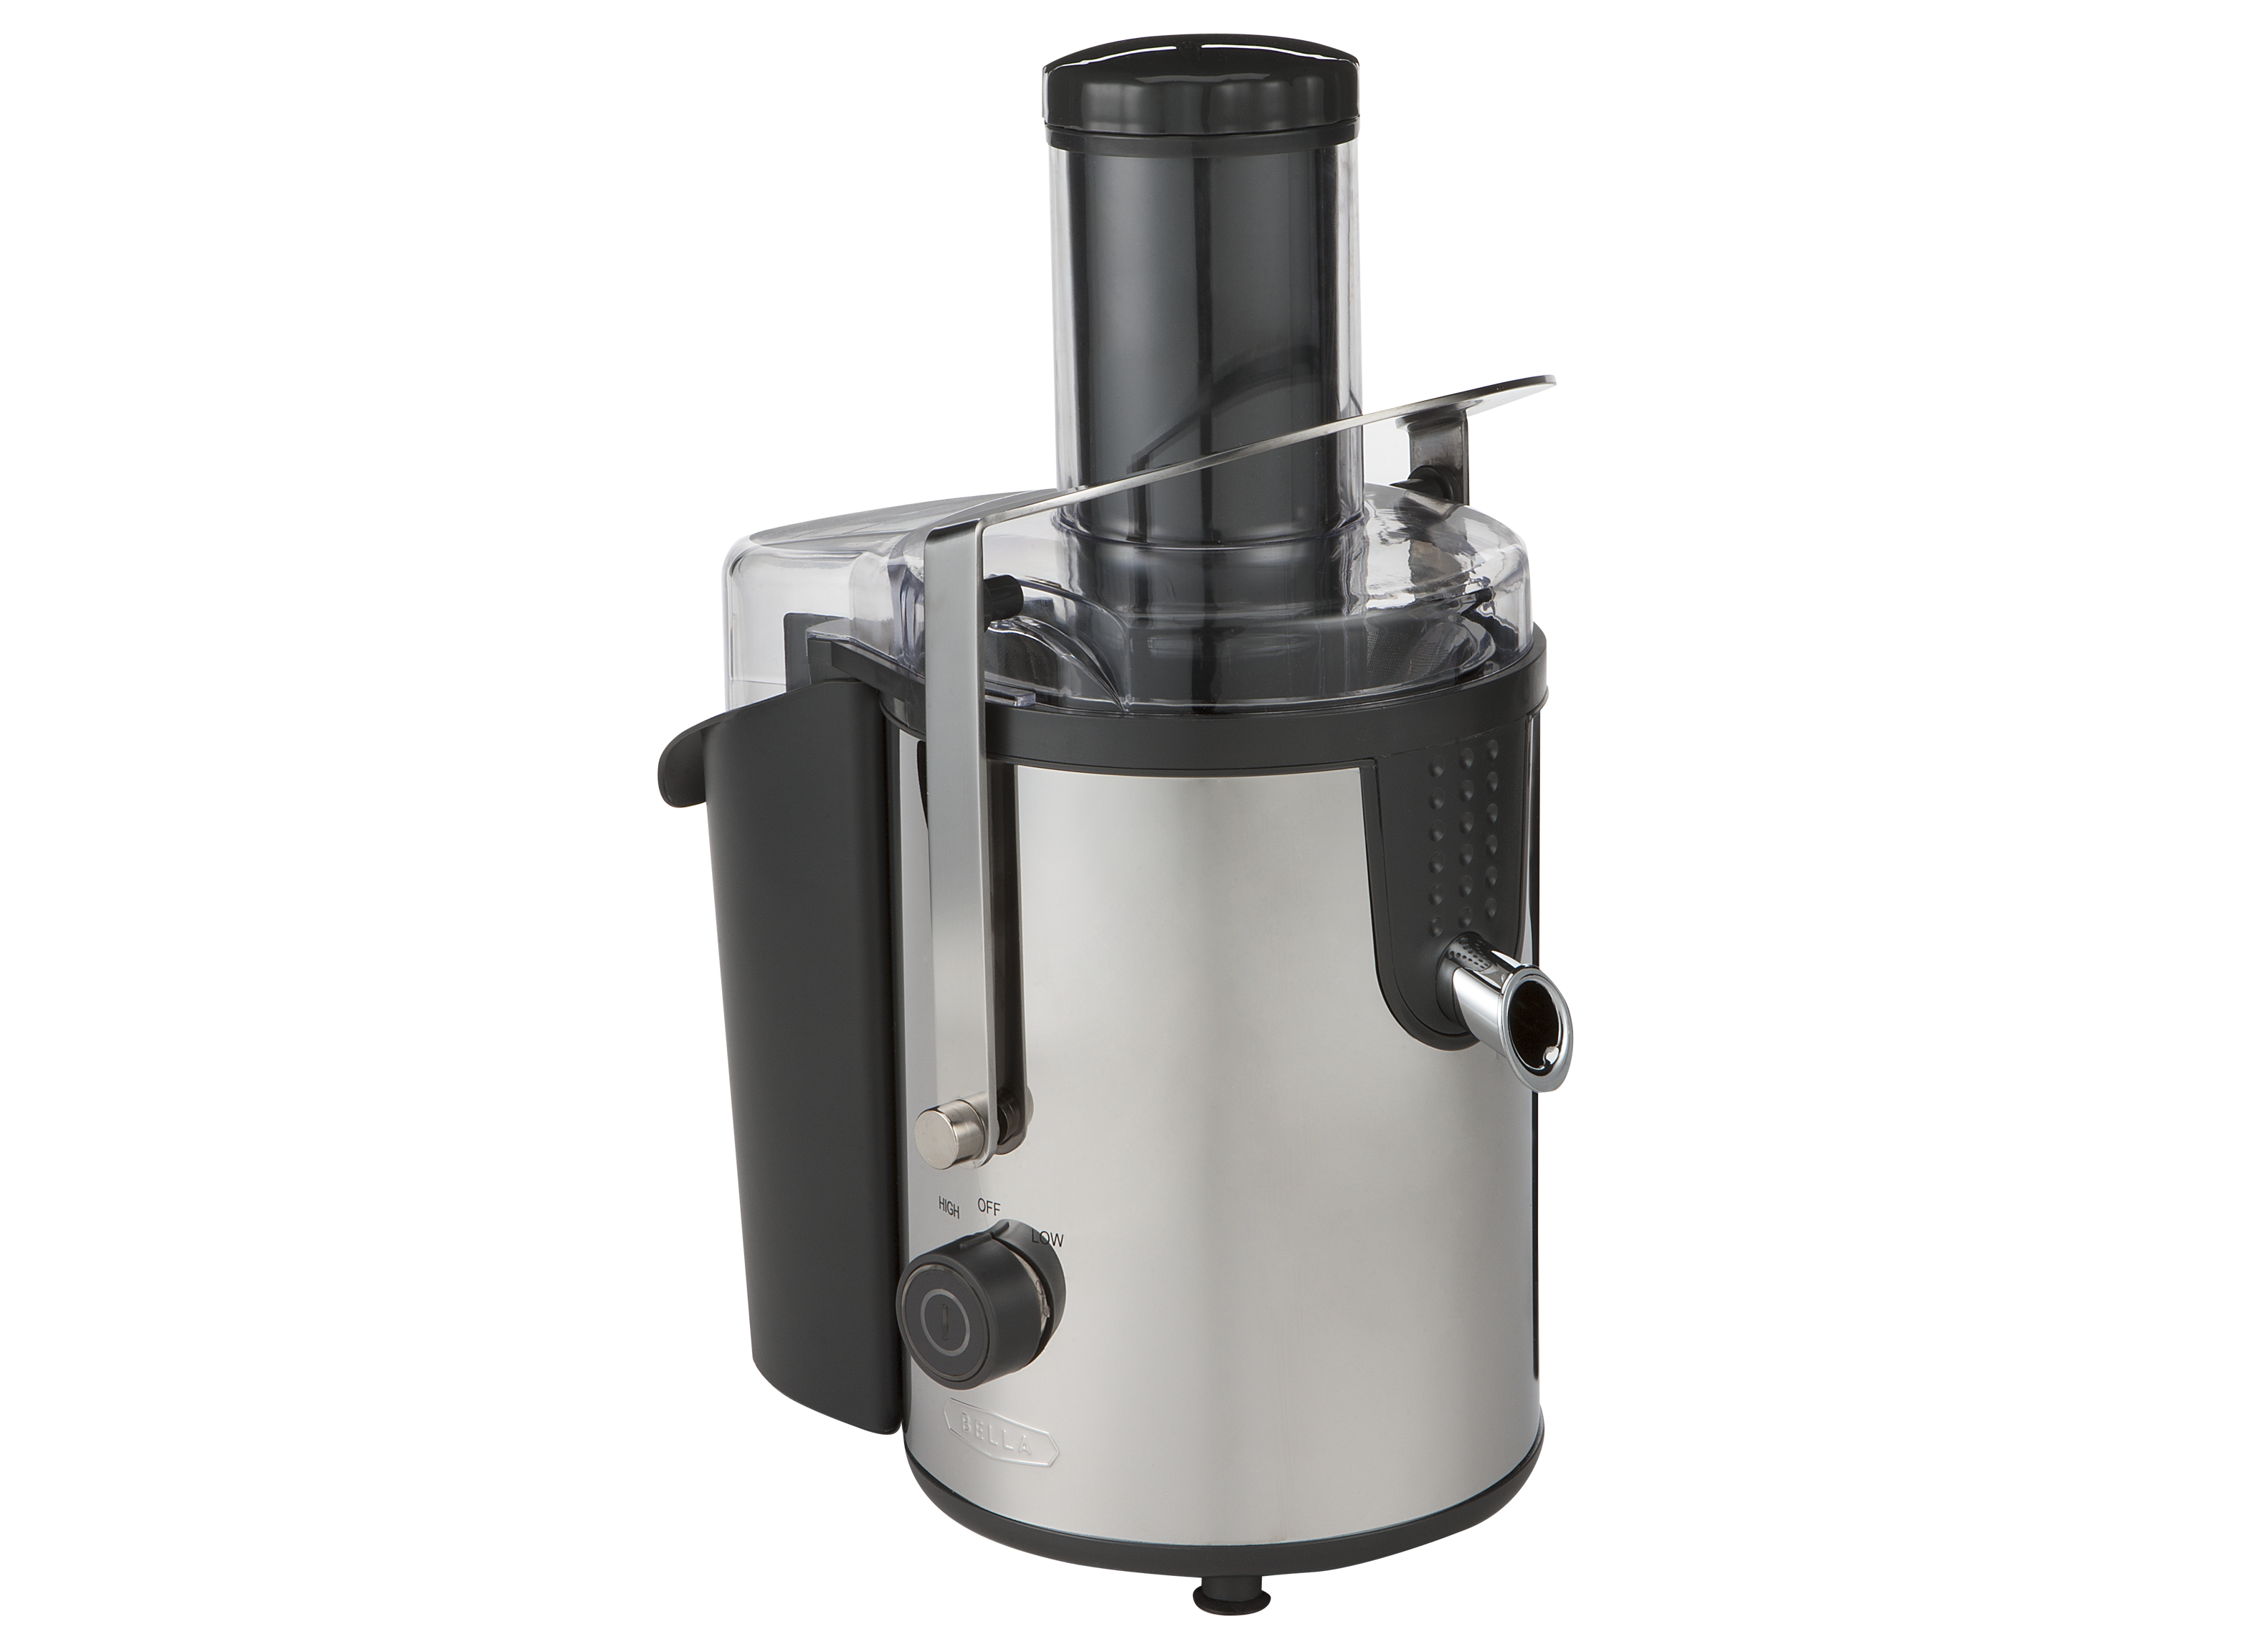 Bella High Power Juice Extractor Juicer Review - Consumer Reports